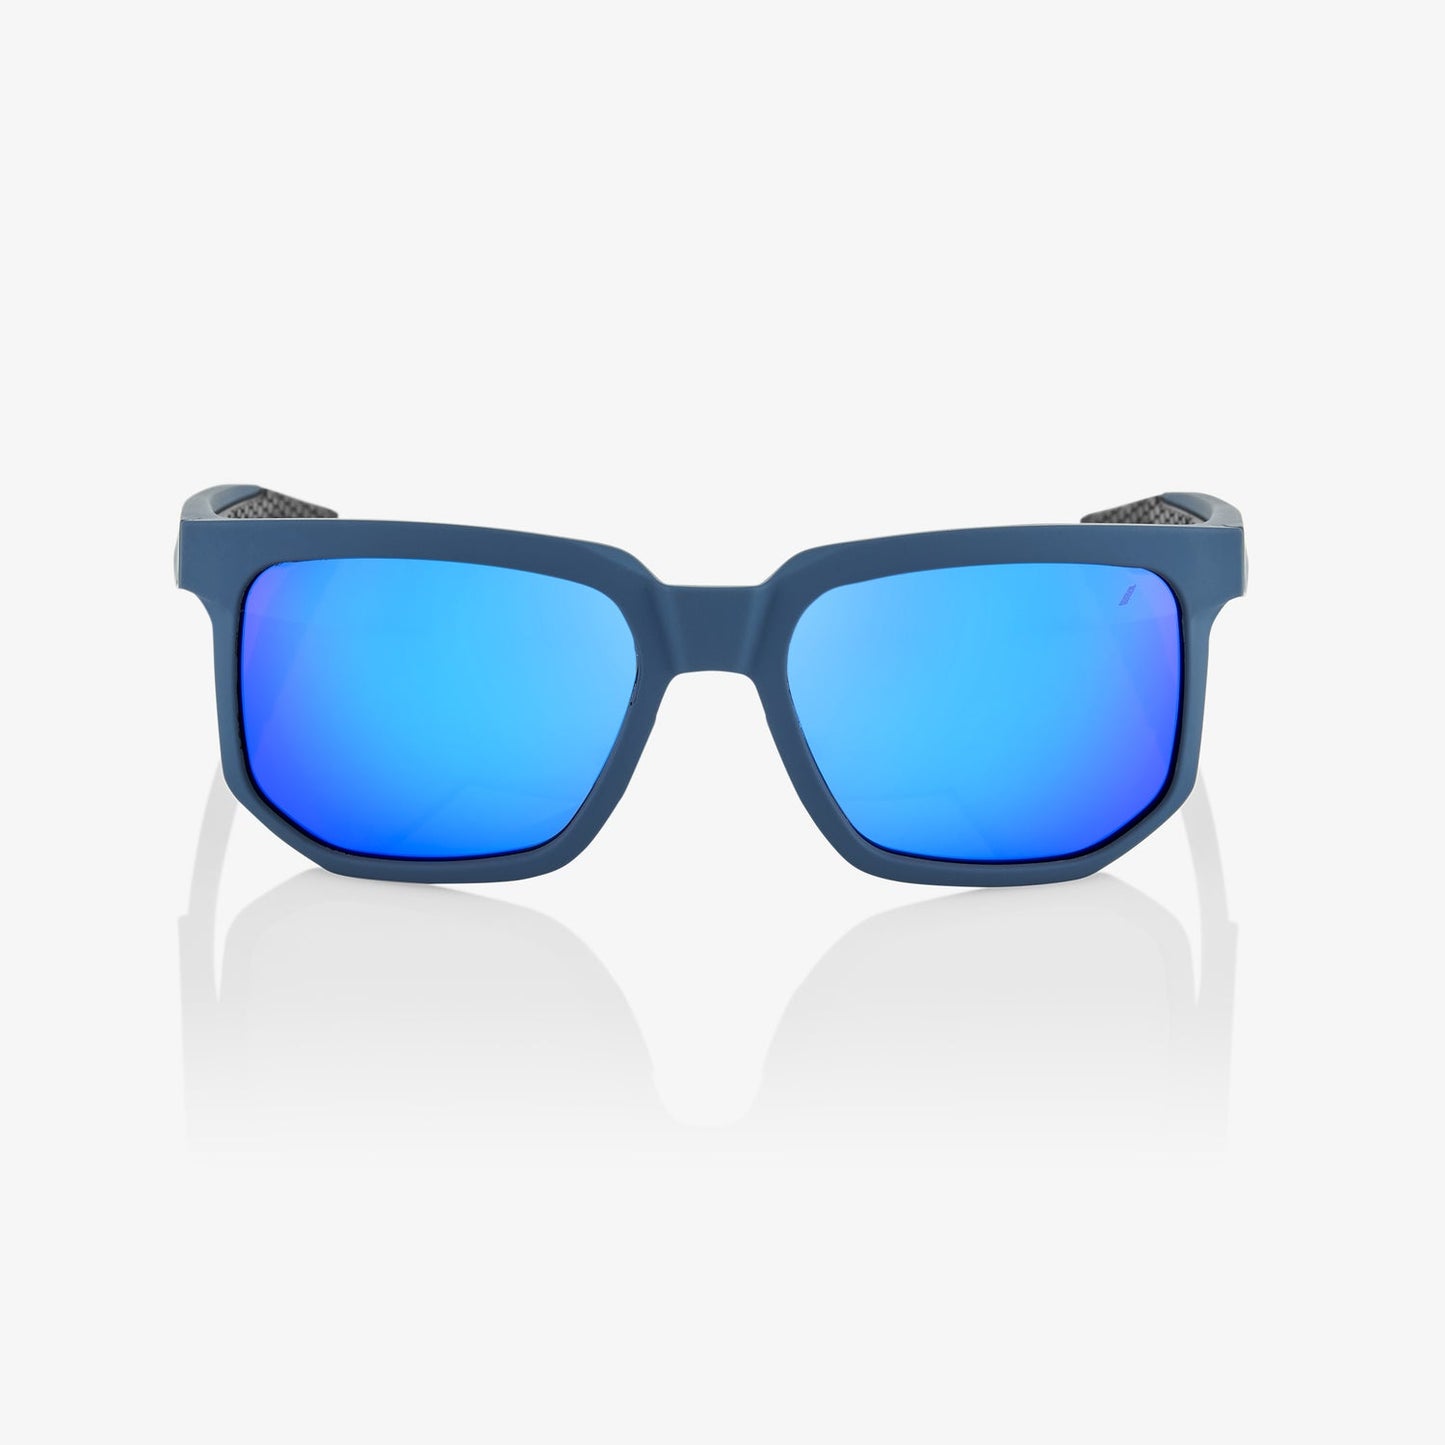 [CENTRIC] Soft Tact Blue - Blue Multilayer Mirror Lens